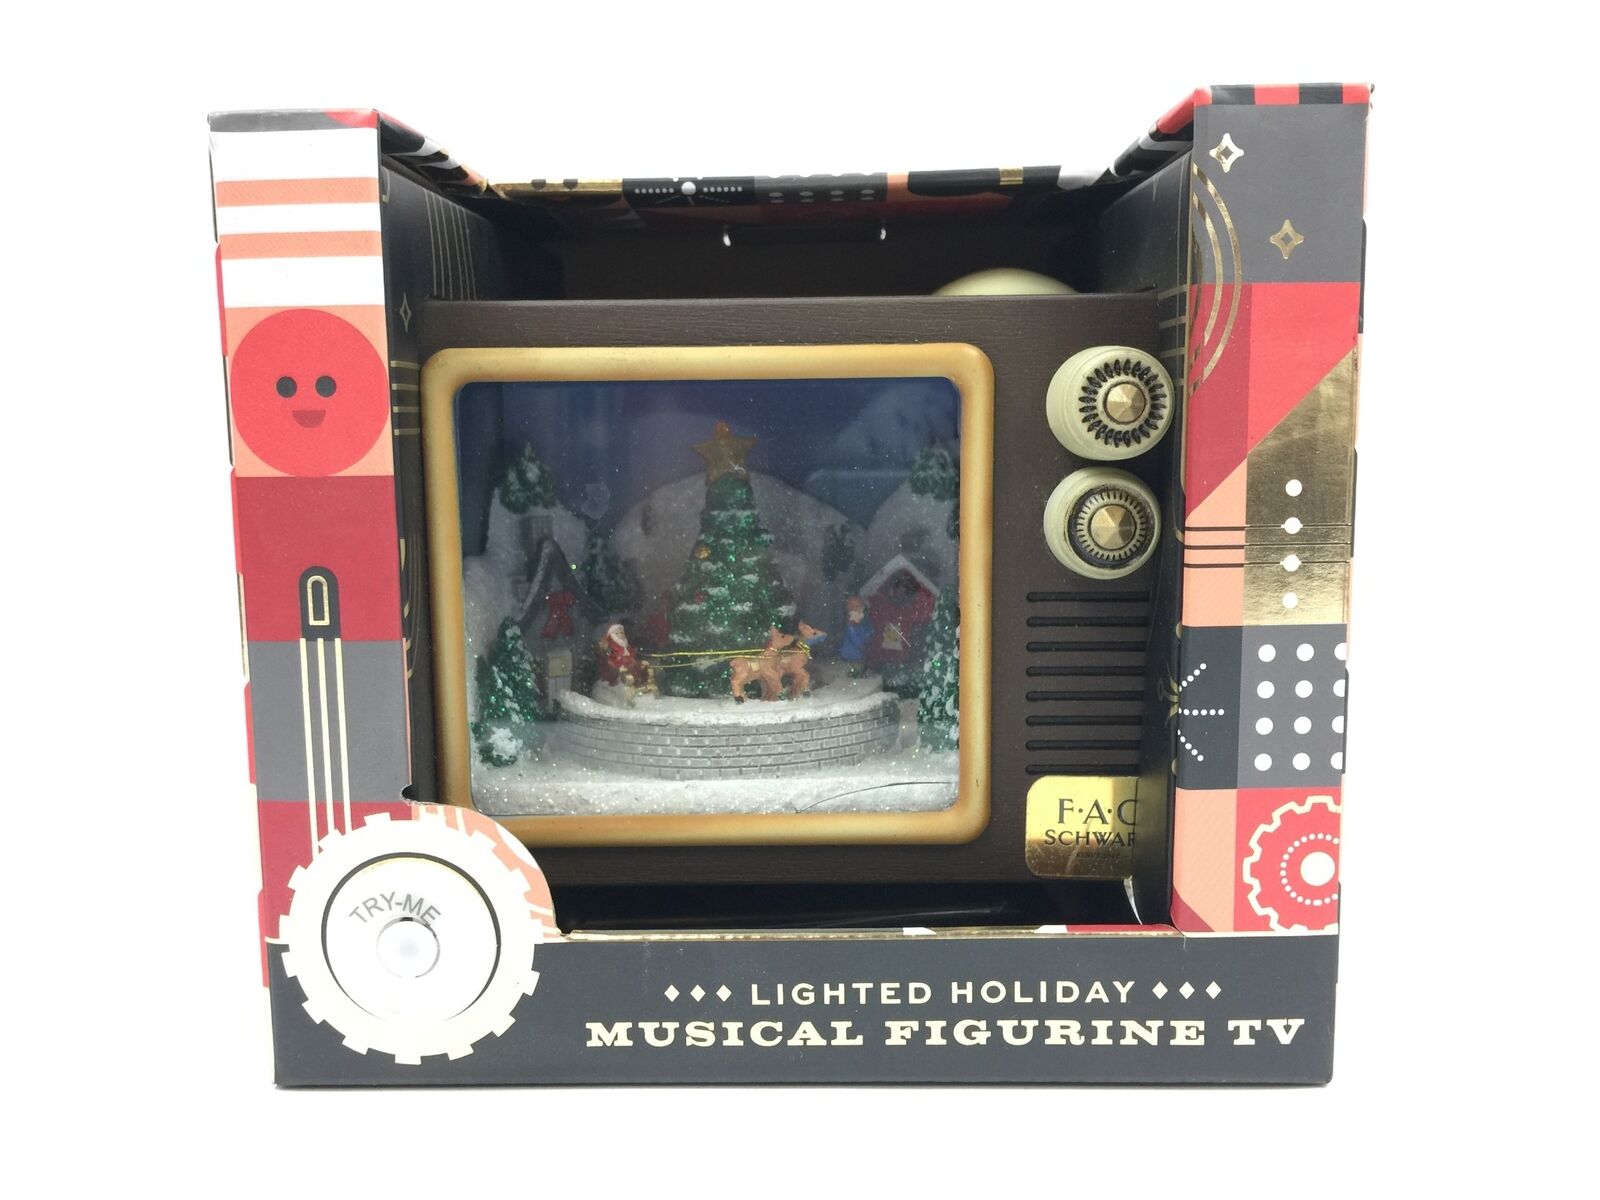 Fao Schwarz Lighted Holiday Musical Figurine Tv Plays W/Defects